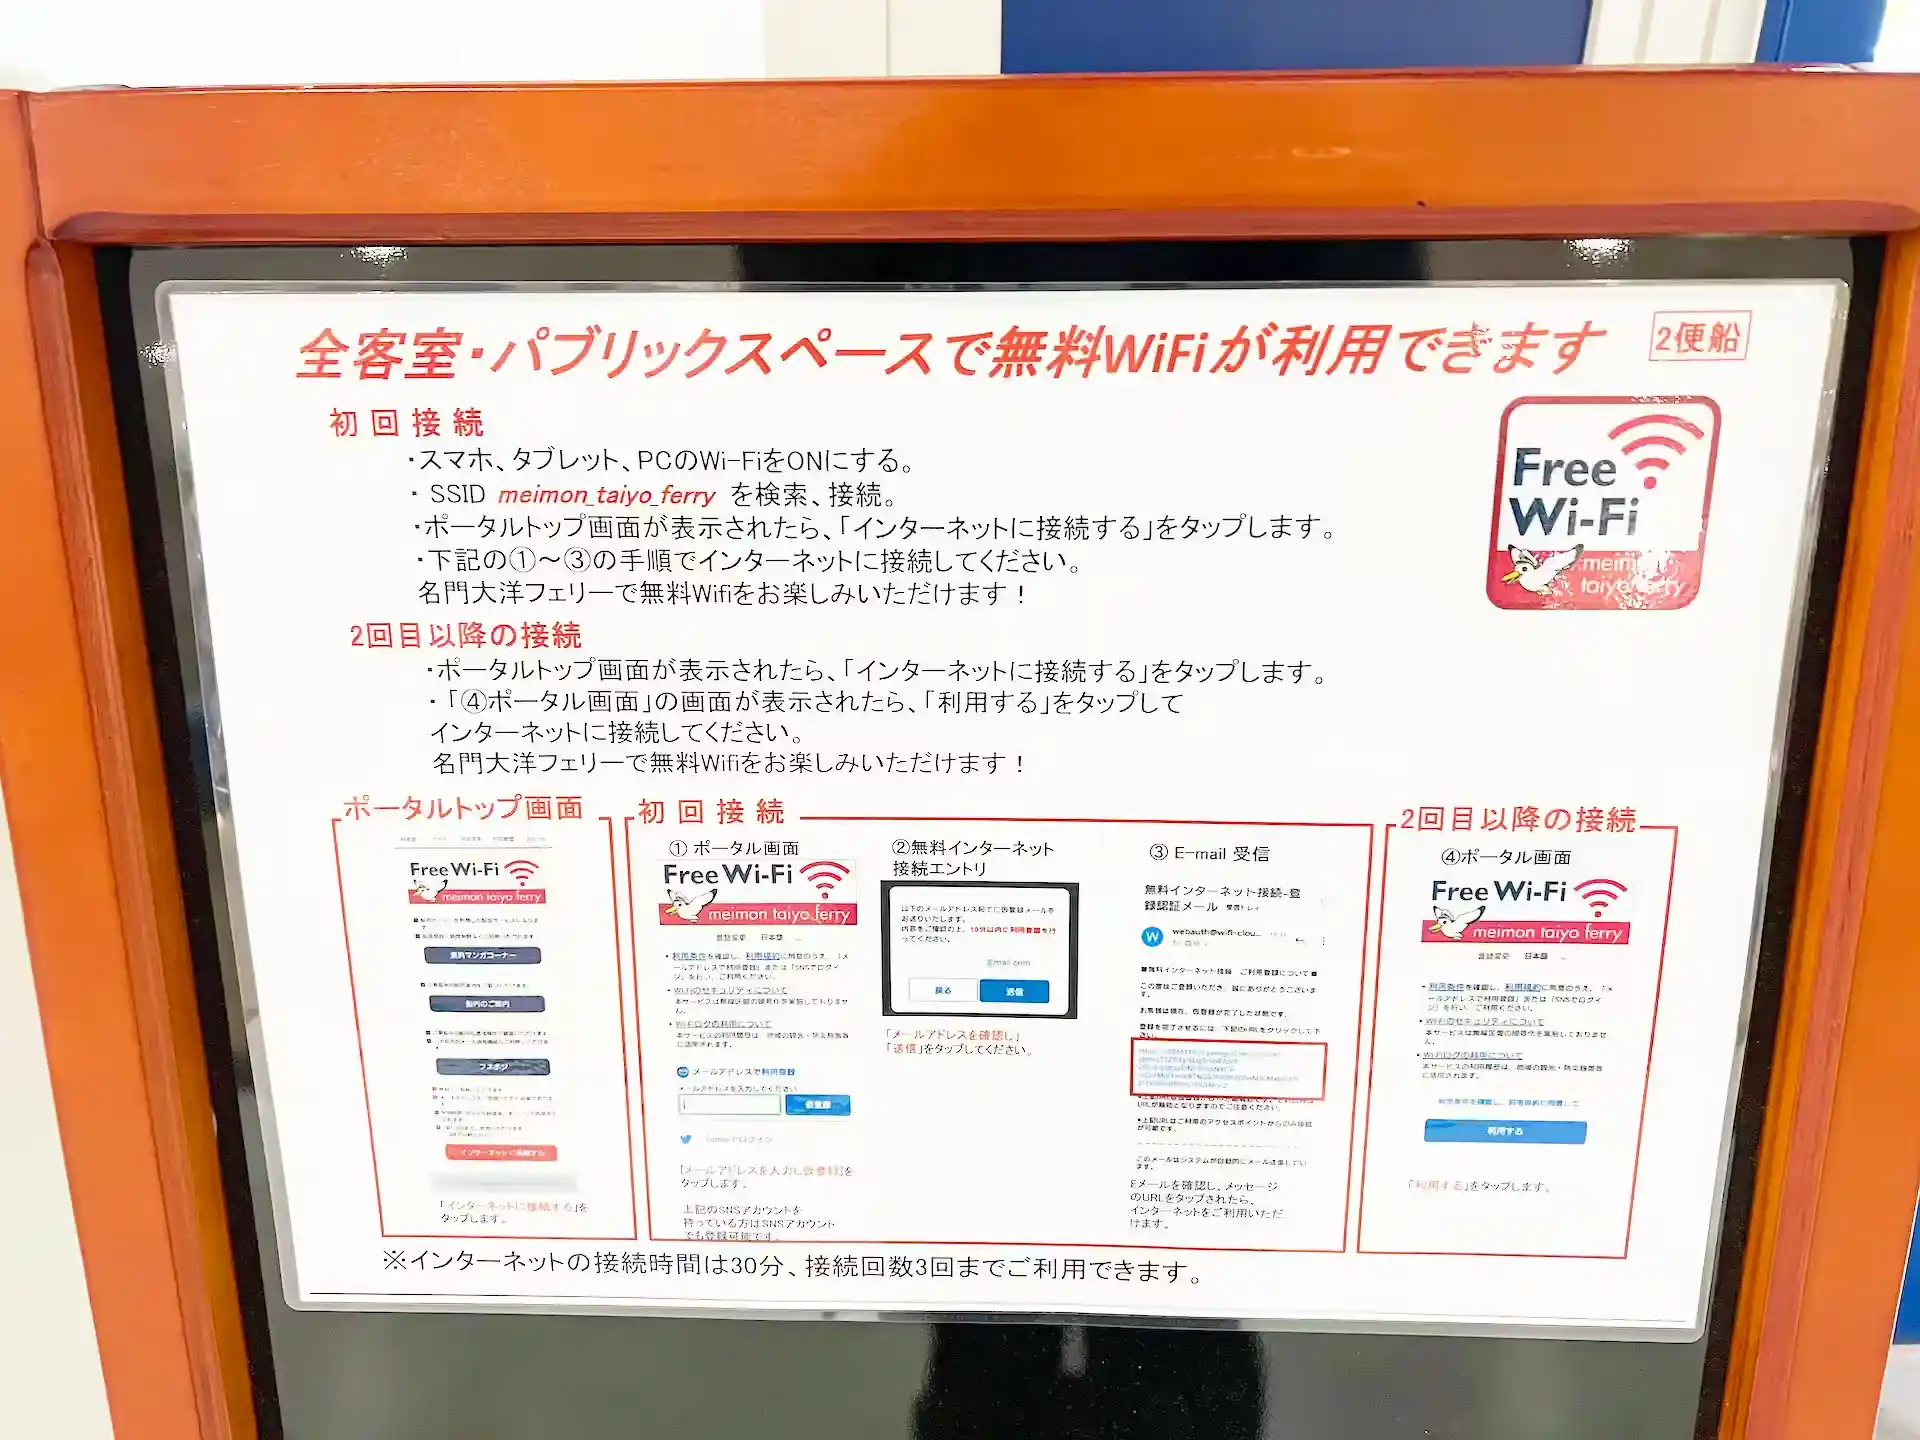 A paper with instructions on how to use the free Wi-Fi on board the Meimon Taiyo Ferry Fukuoka